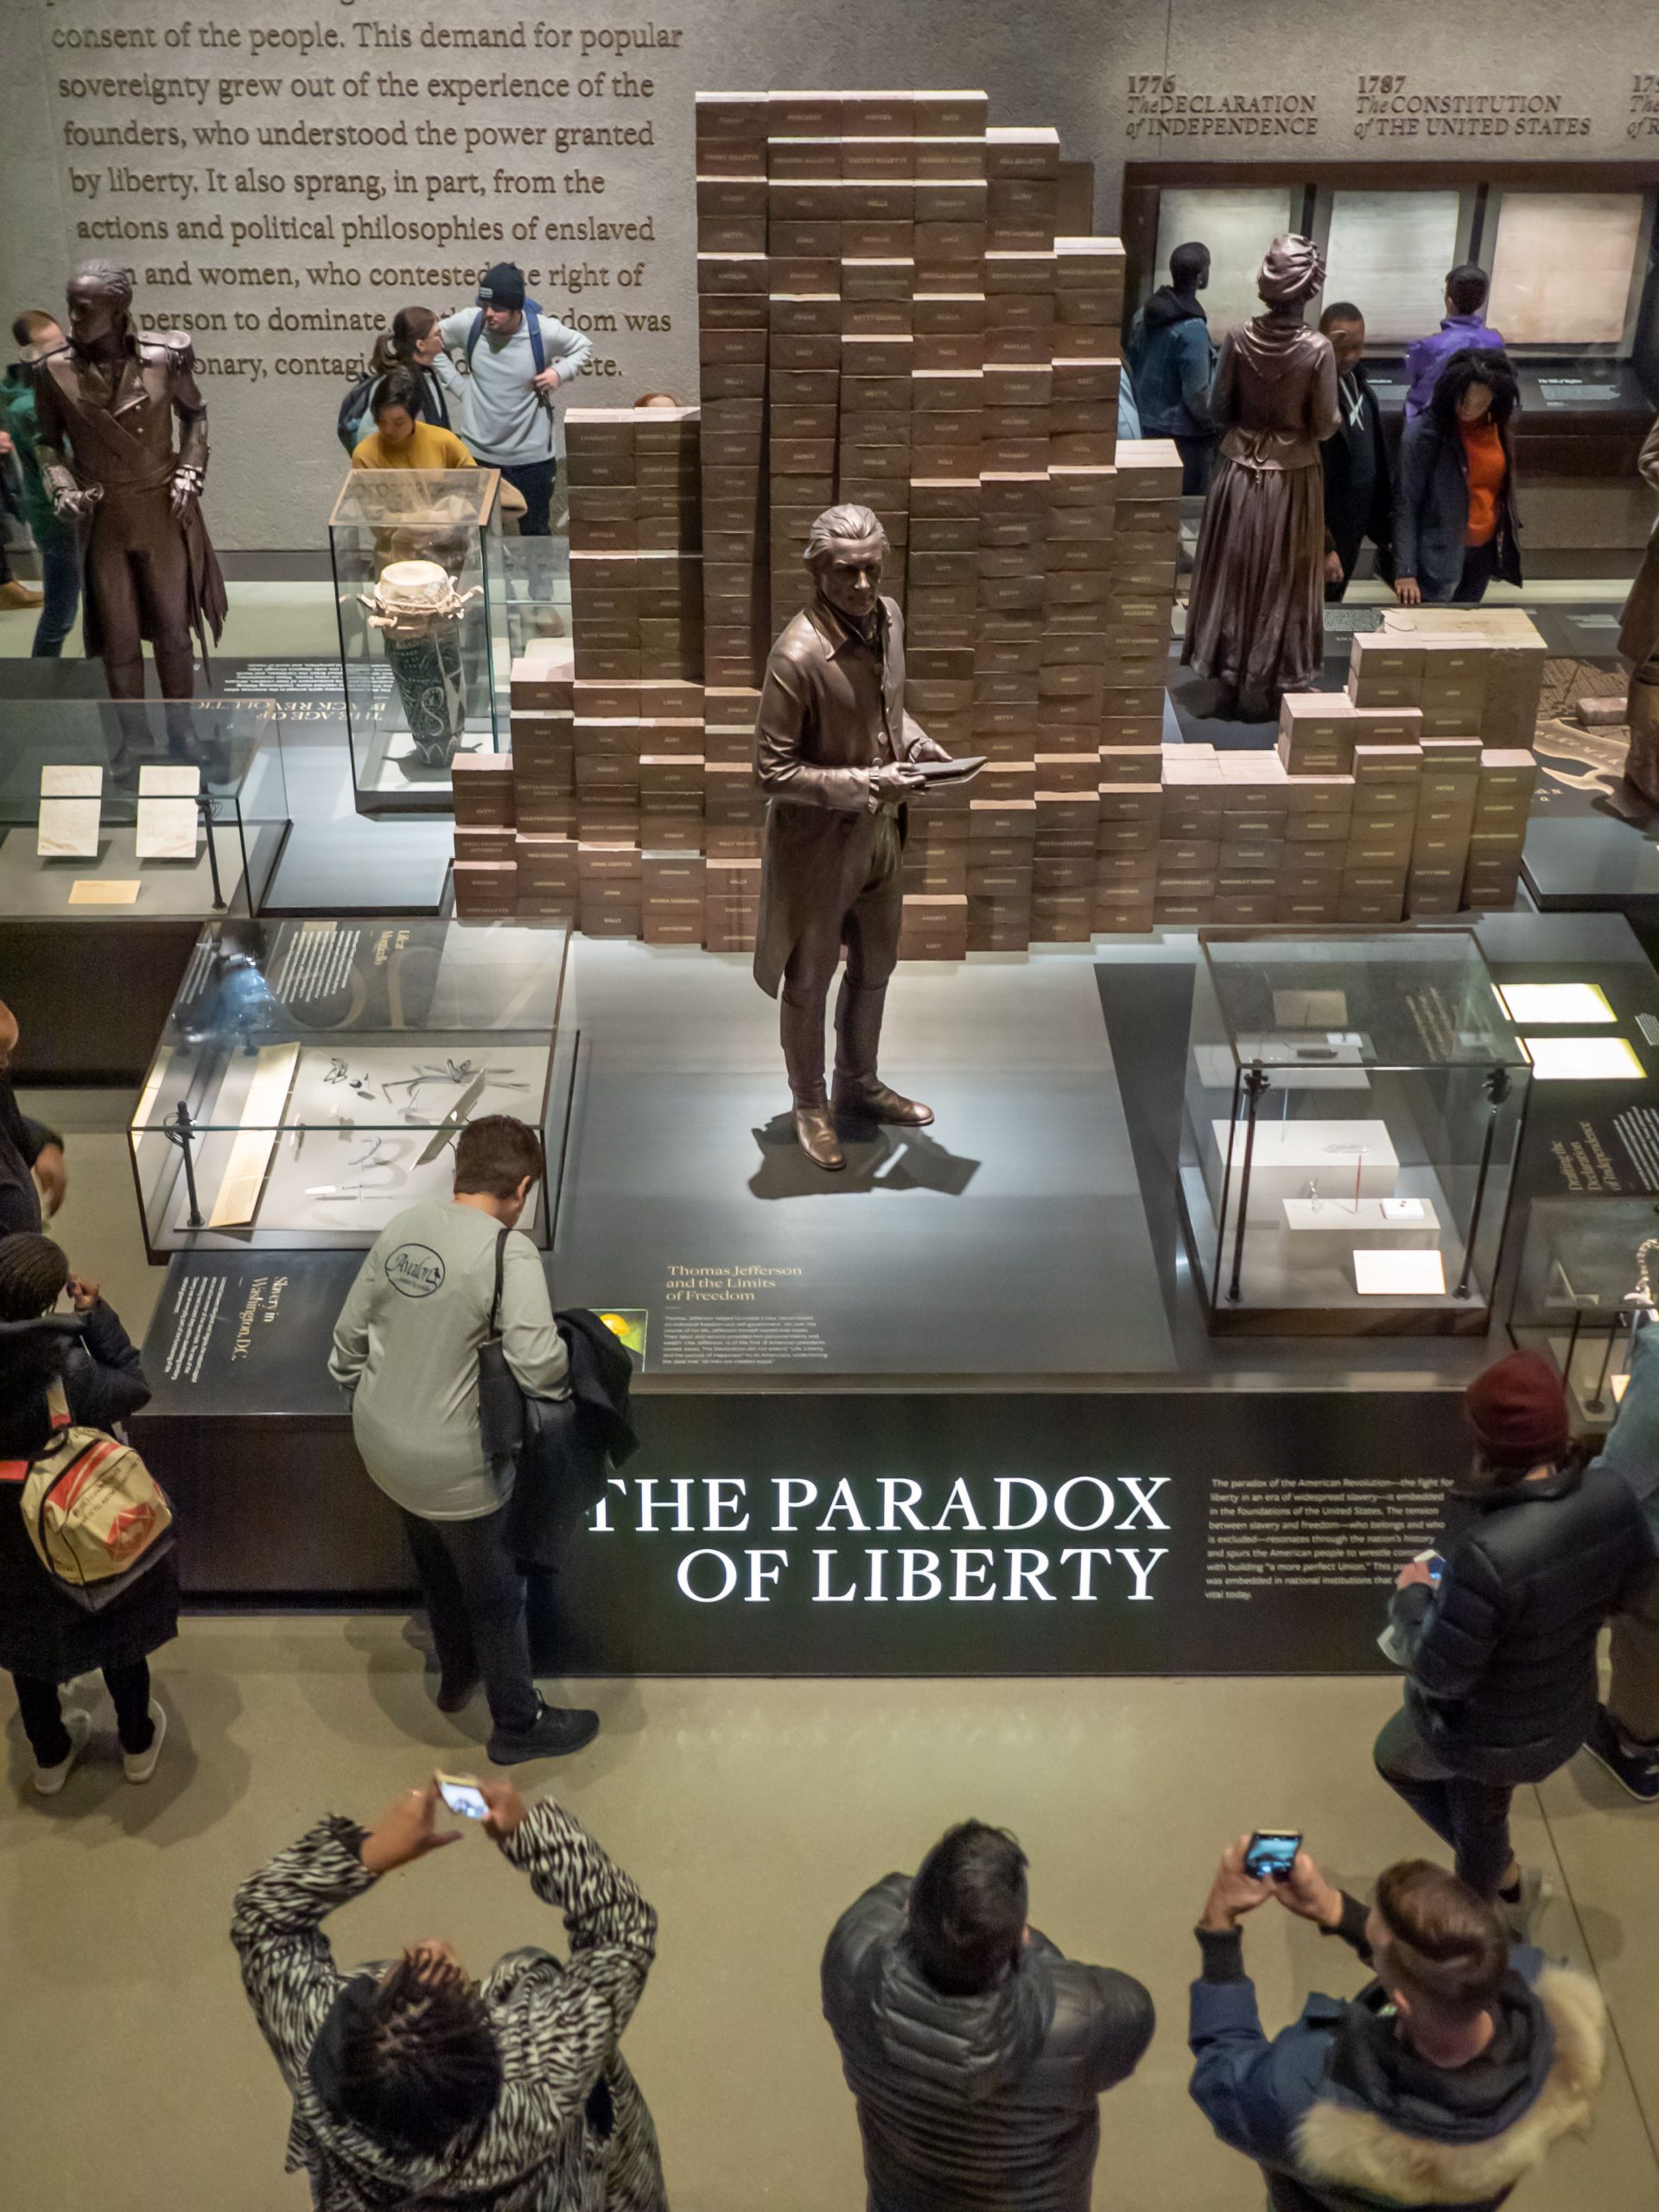 People looking at museum exhibit with statue of Thomas Jefferson at center